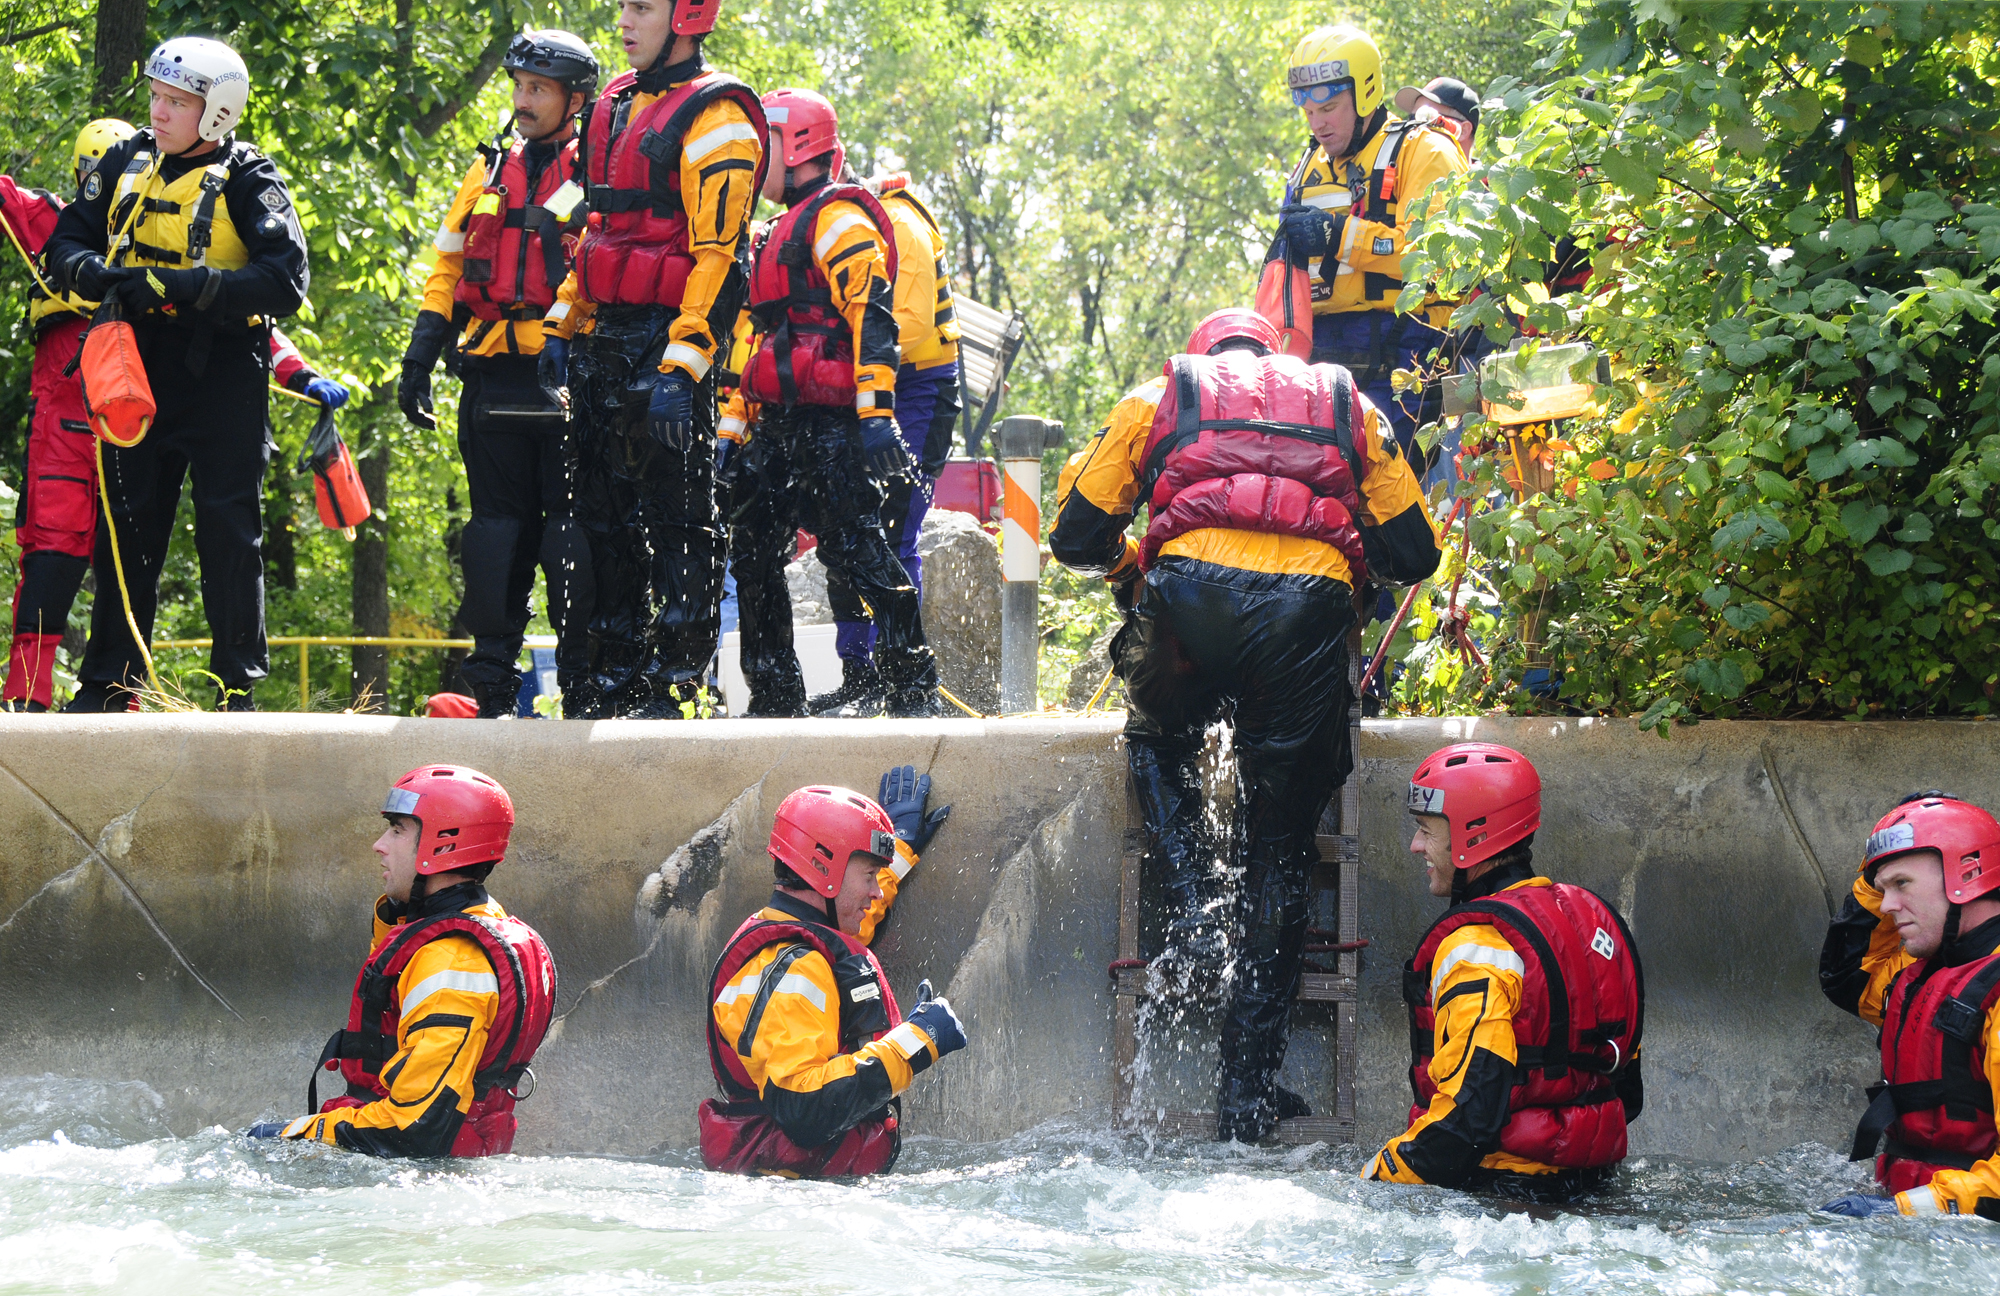 More than 20 participants used Thunder River at Six Flags St. Louis to learn techniques for rescuing victims of flooding. In 2010, the National Weather Service reported 103 deaths related to flooding.